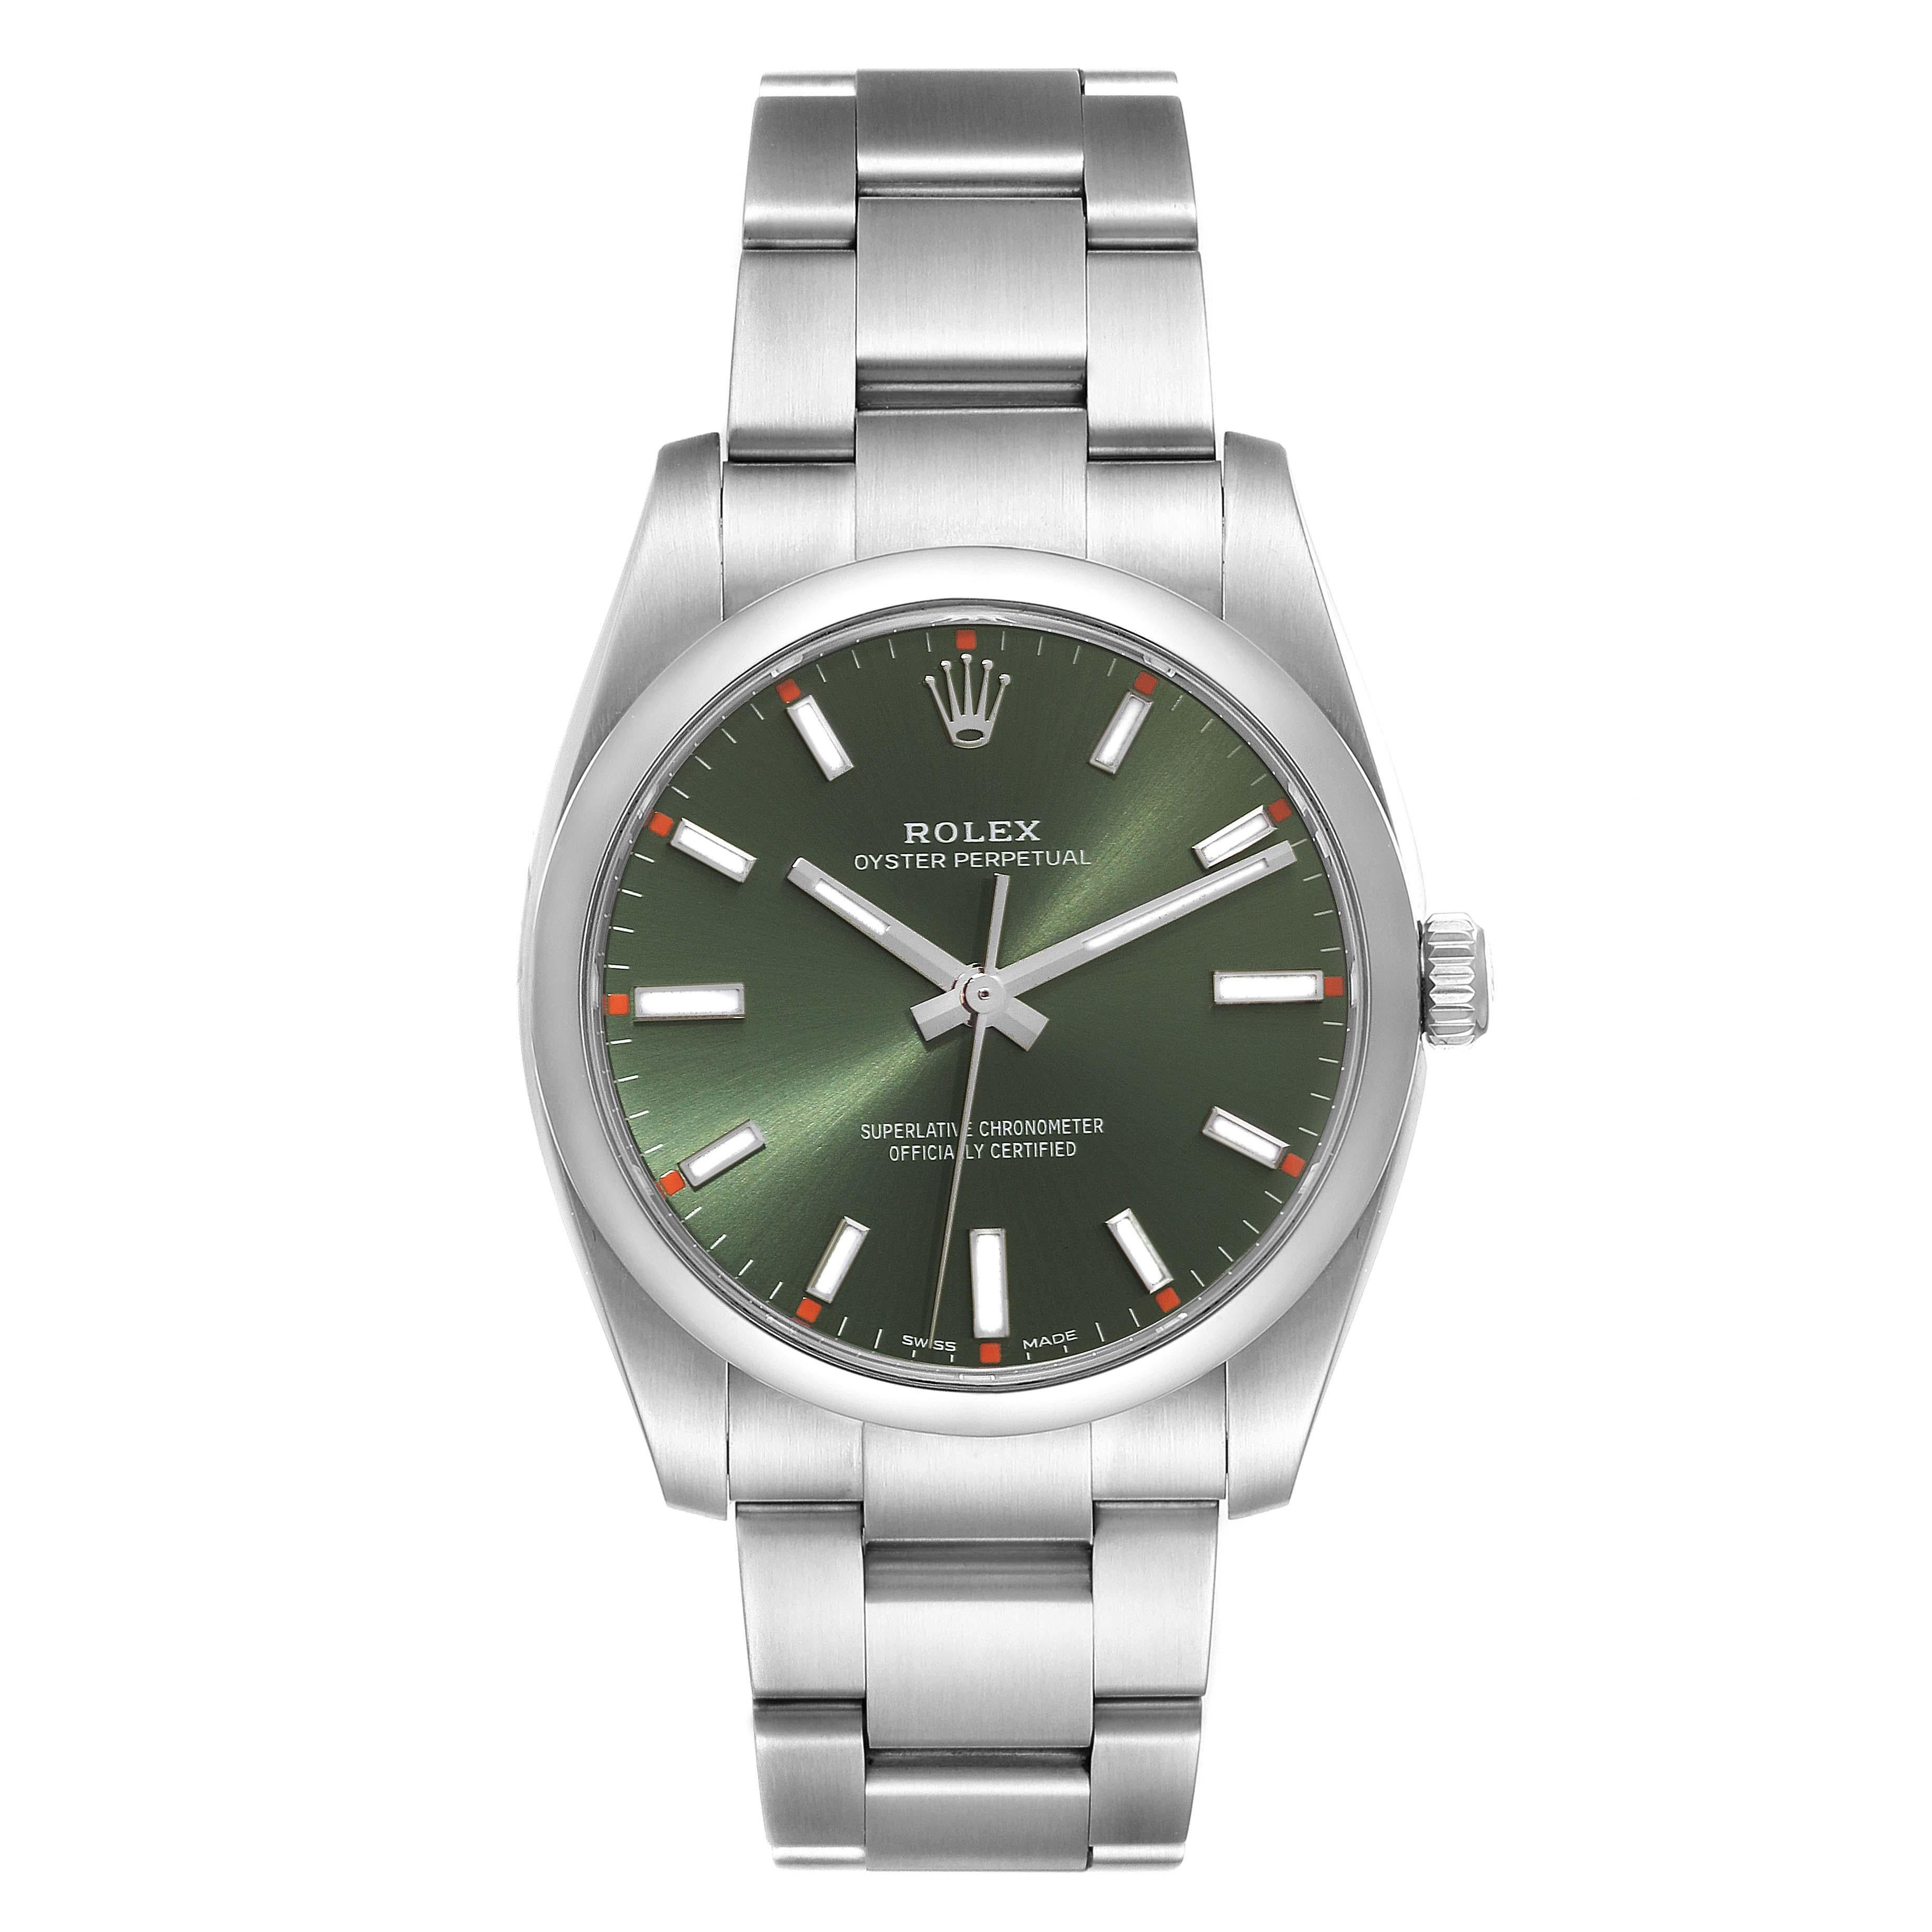 Rolex Oyster Perpetual Olive Green Dial Steel Mens Watch 114200 Box Card. Officially certified chronometer automatic self-winding movement. Stainless steel case 34.0 mm in diameter.  Rolex logo on the crown. Stainless steel smooth domed bezel.